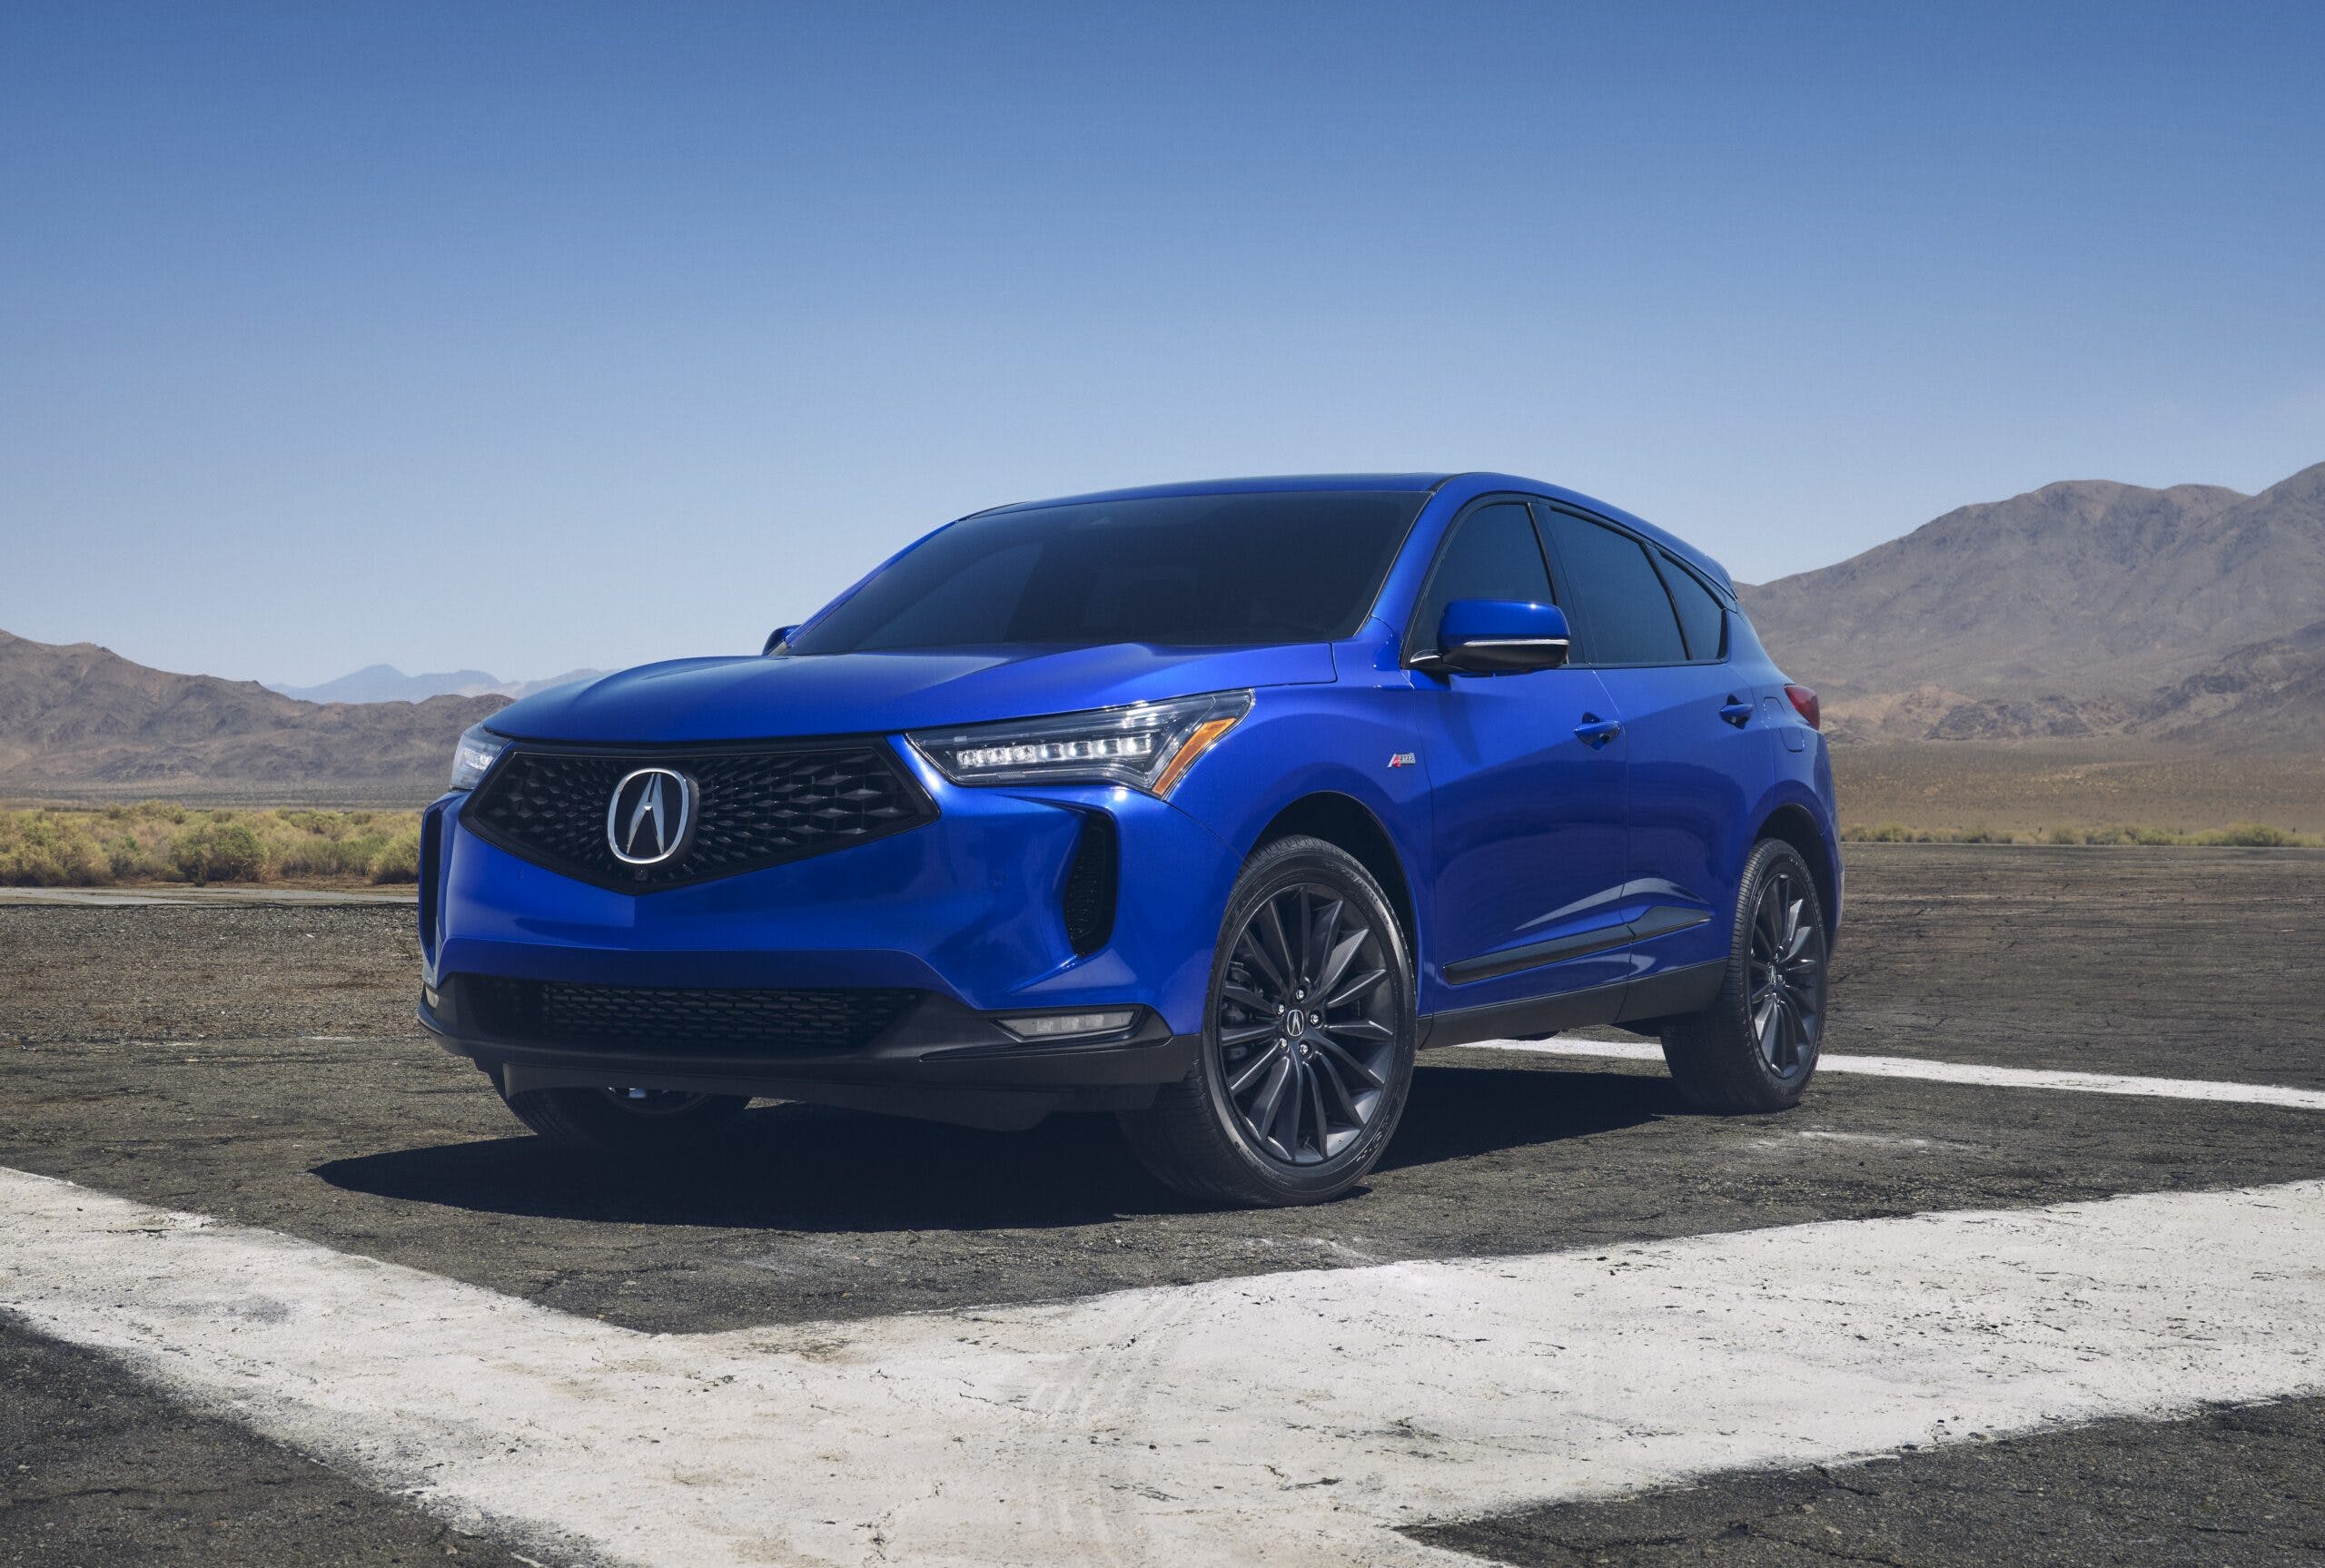 Test Drive: 2022 Acura RDX A-Spec Review - CARFAX